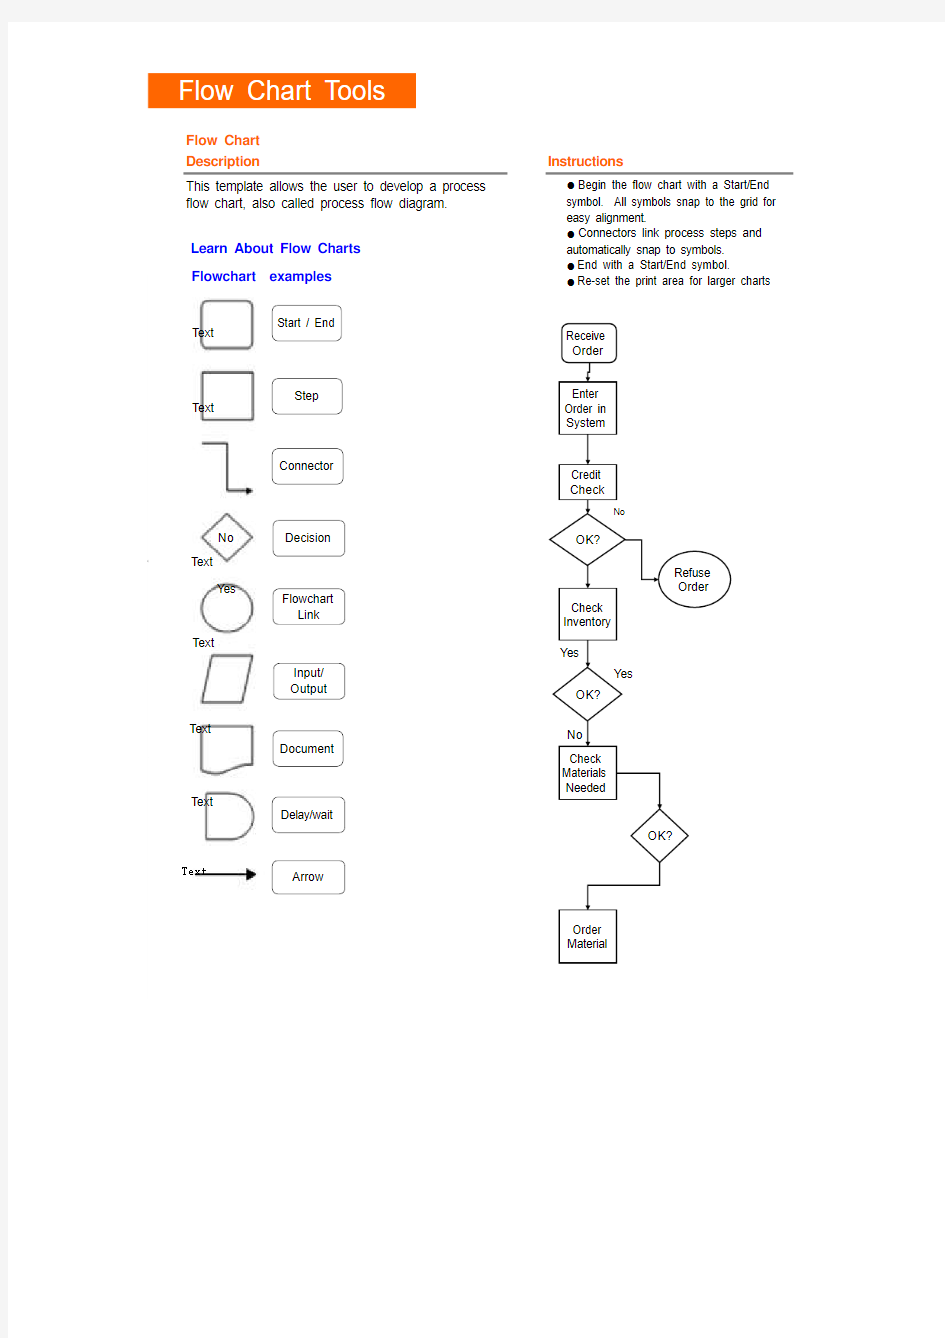 Flow chart tool流程图绘制工具